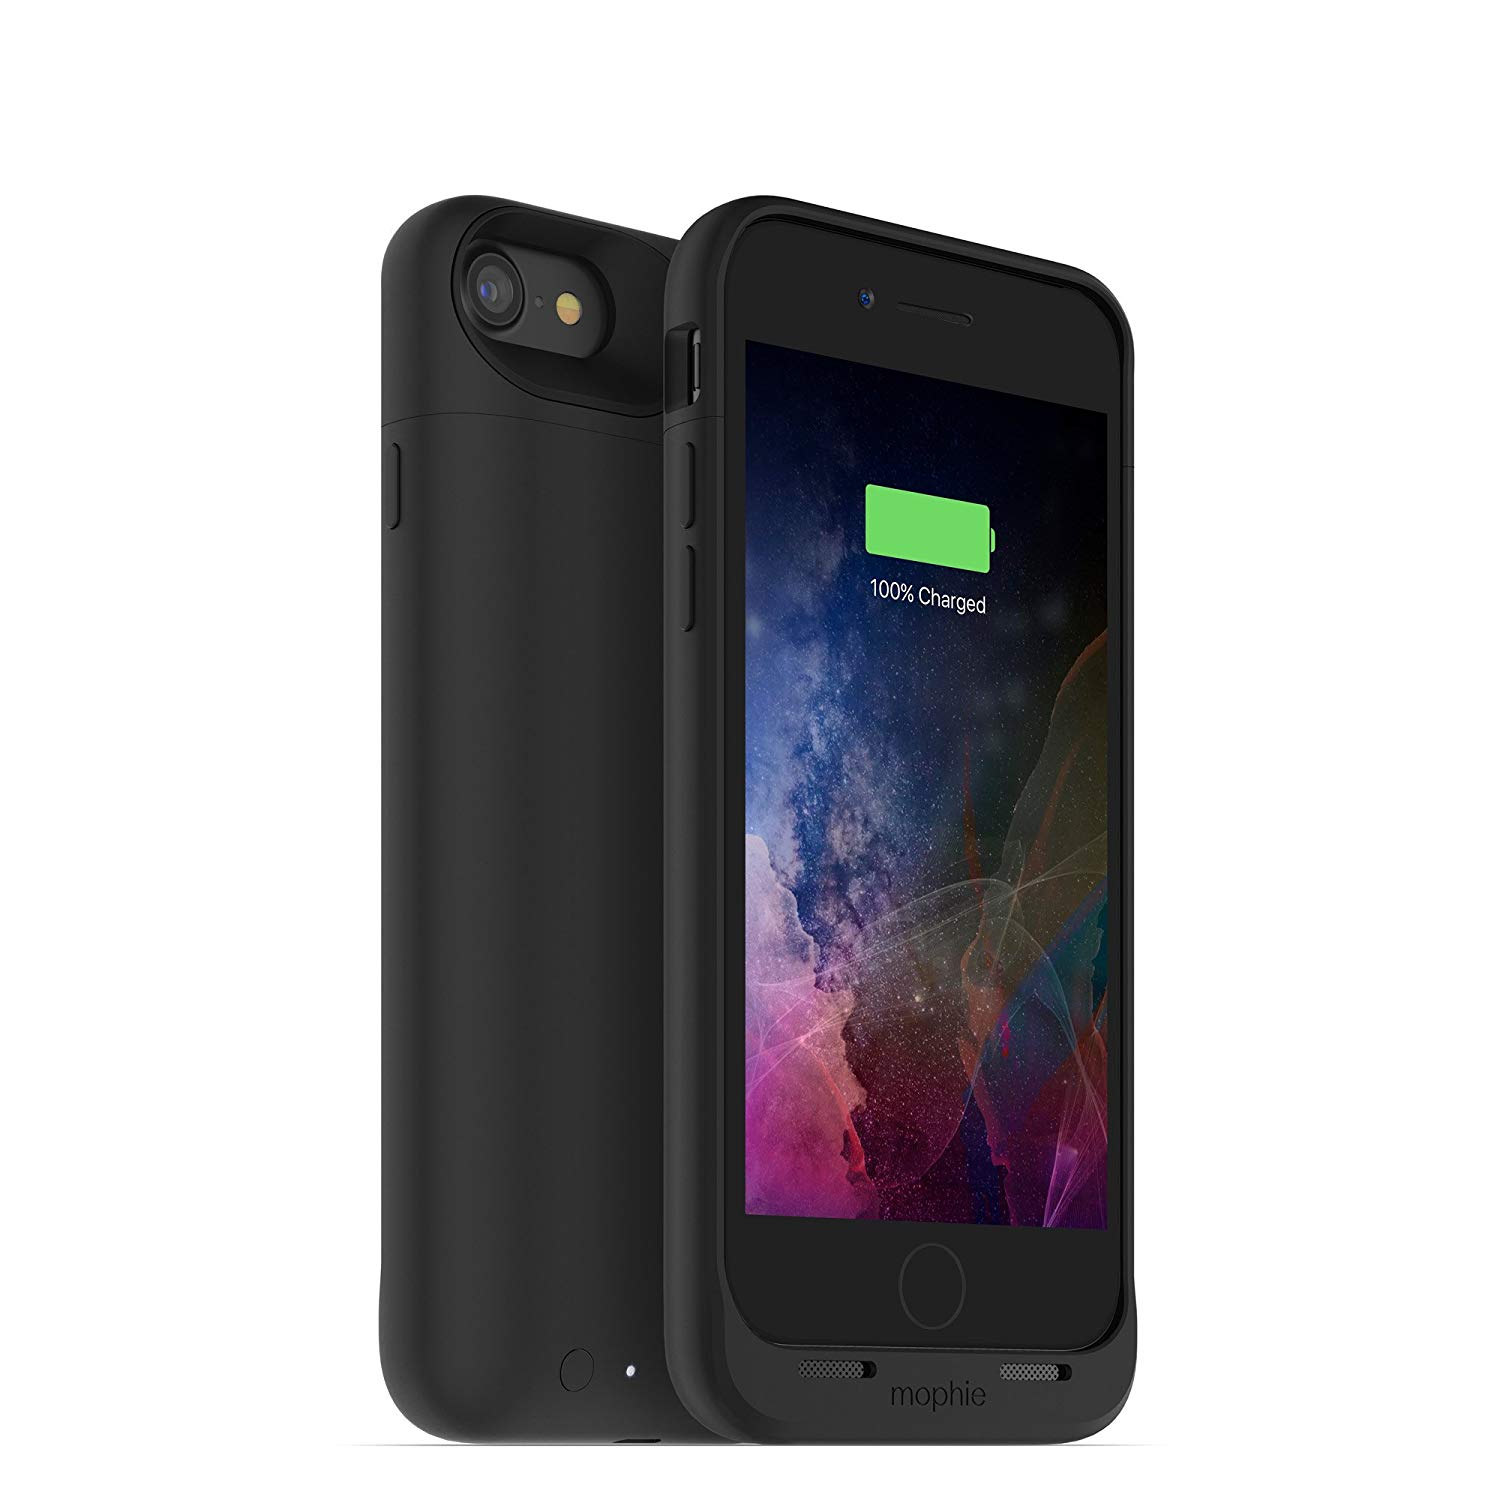 Steve Blum recommends Mophie Juice Pack charging case for iPhone 7/8